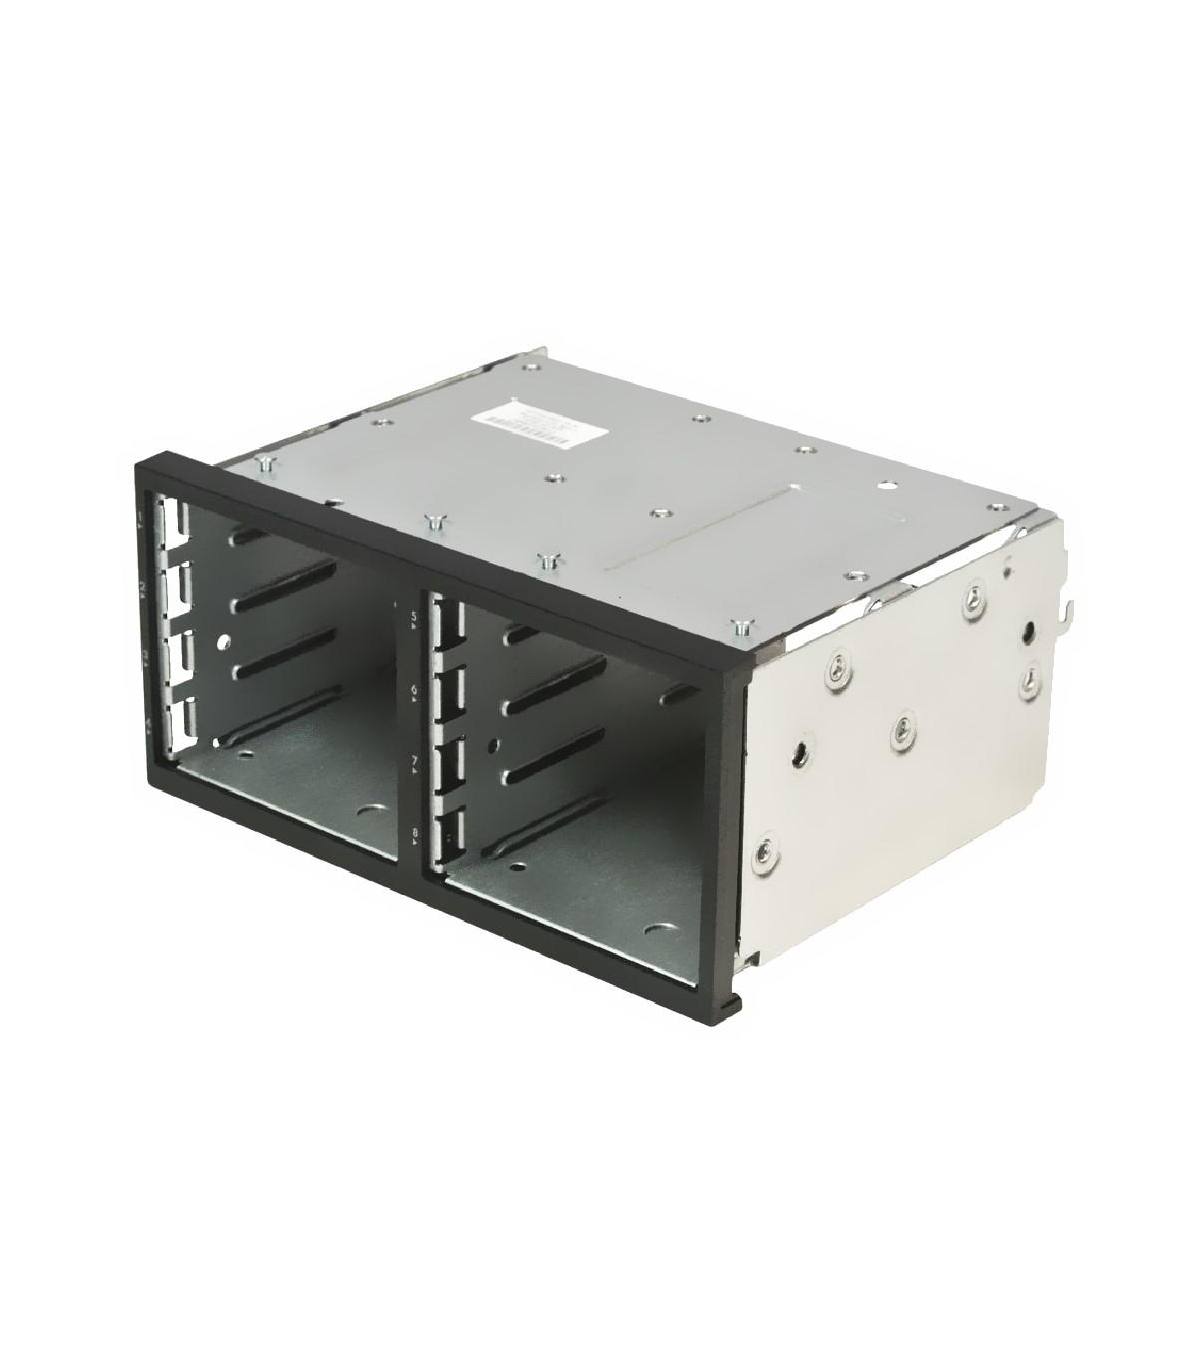 HP DL380 G6/G7 8x2,5" CAGE + BACKPLANE + KABLE 496074-001 463184-002 493228-006 507690-001